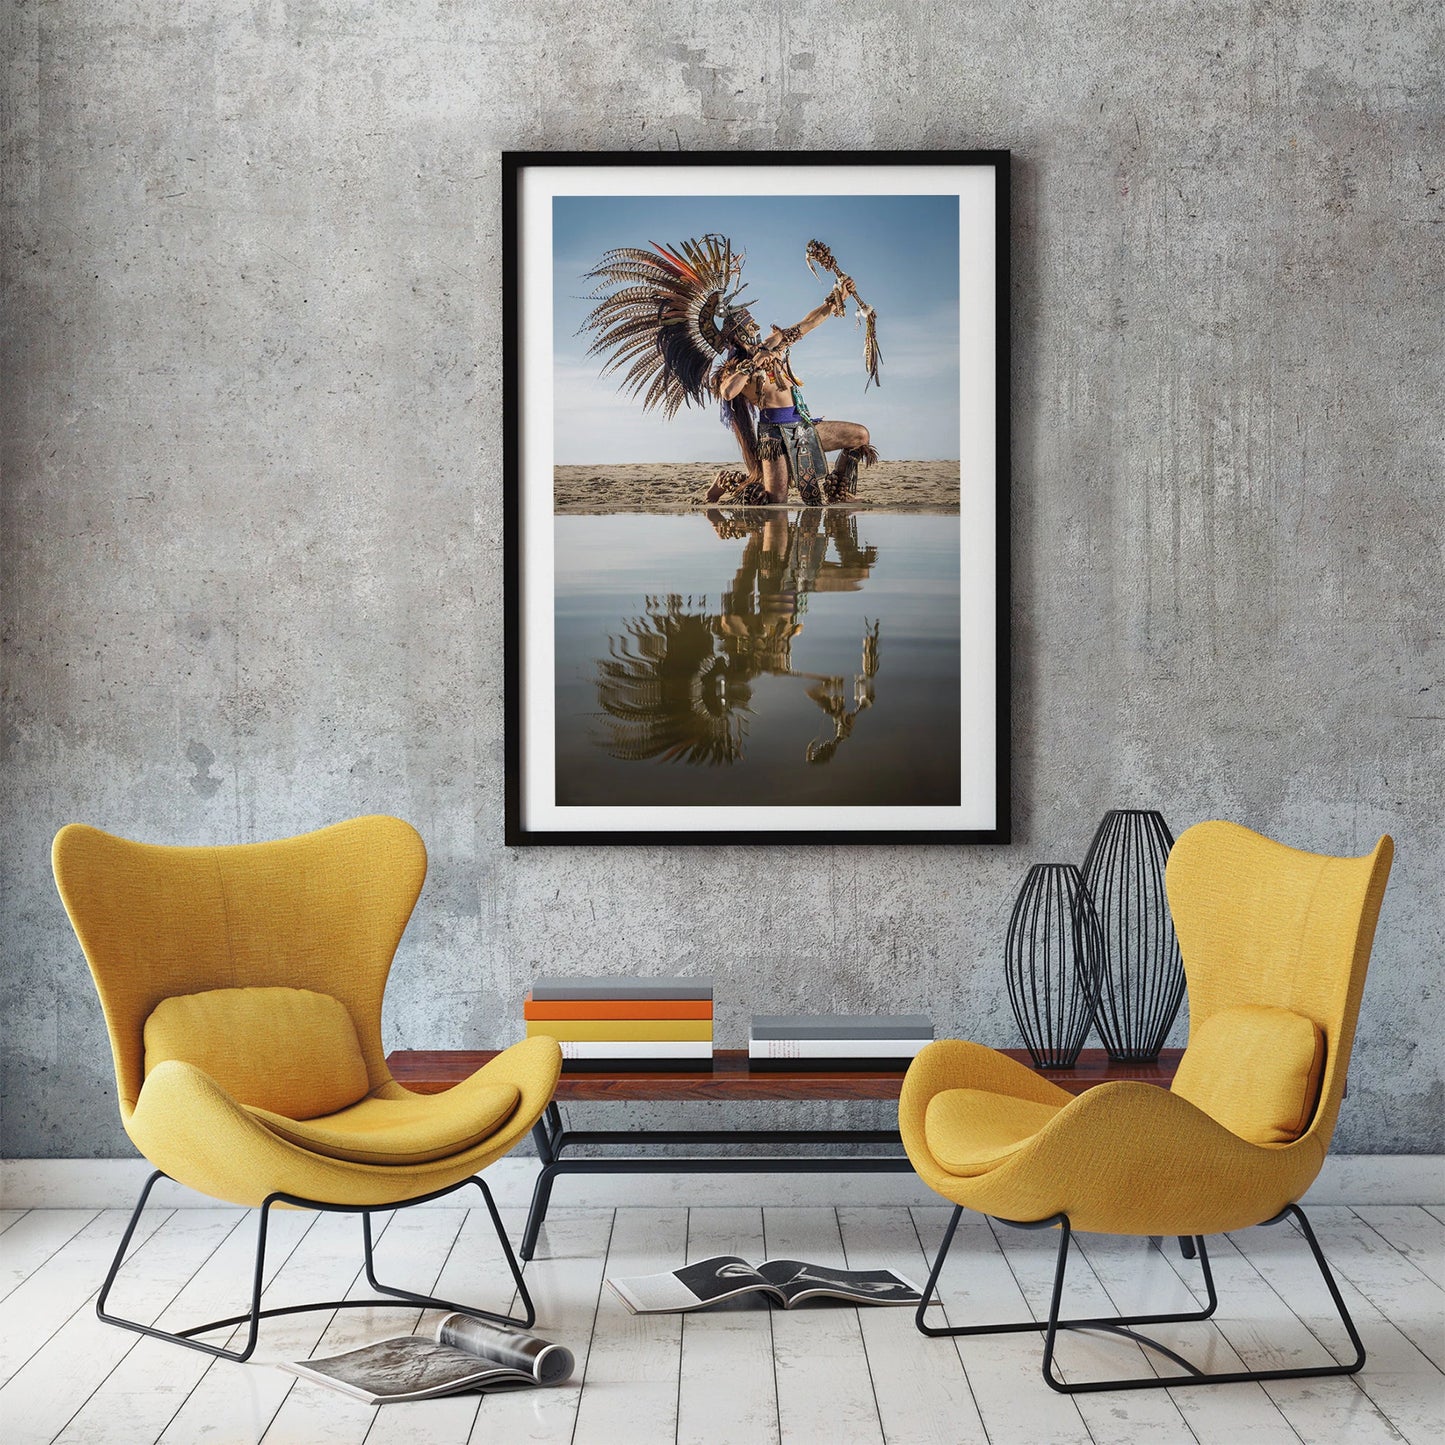 Aztec Warrior Tribute: Fine Art Mexico Photography for Authentic Wall Decor and Aztec Art Enthusiasts